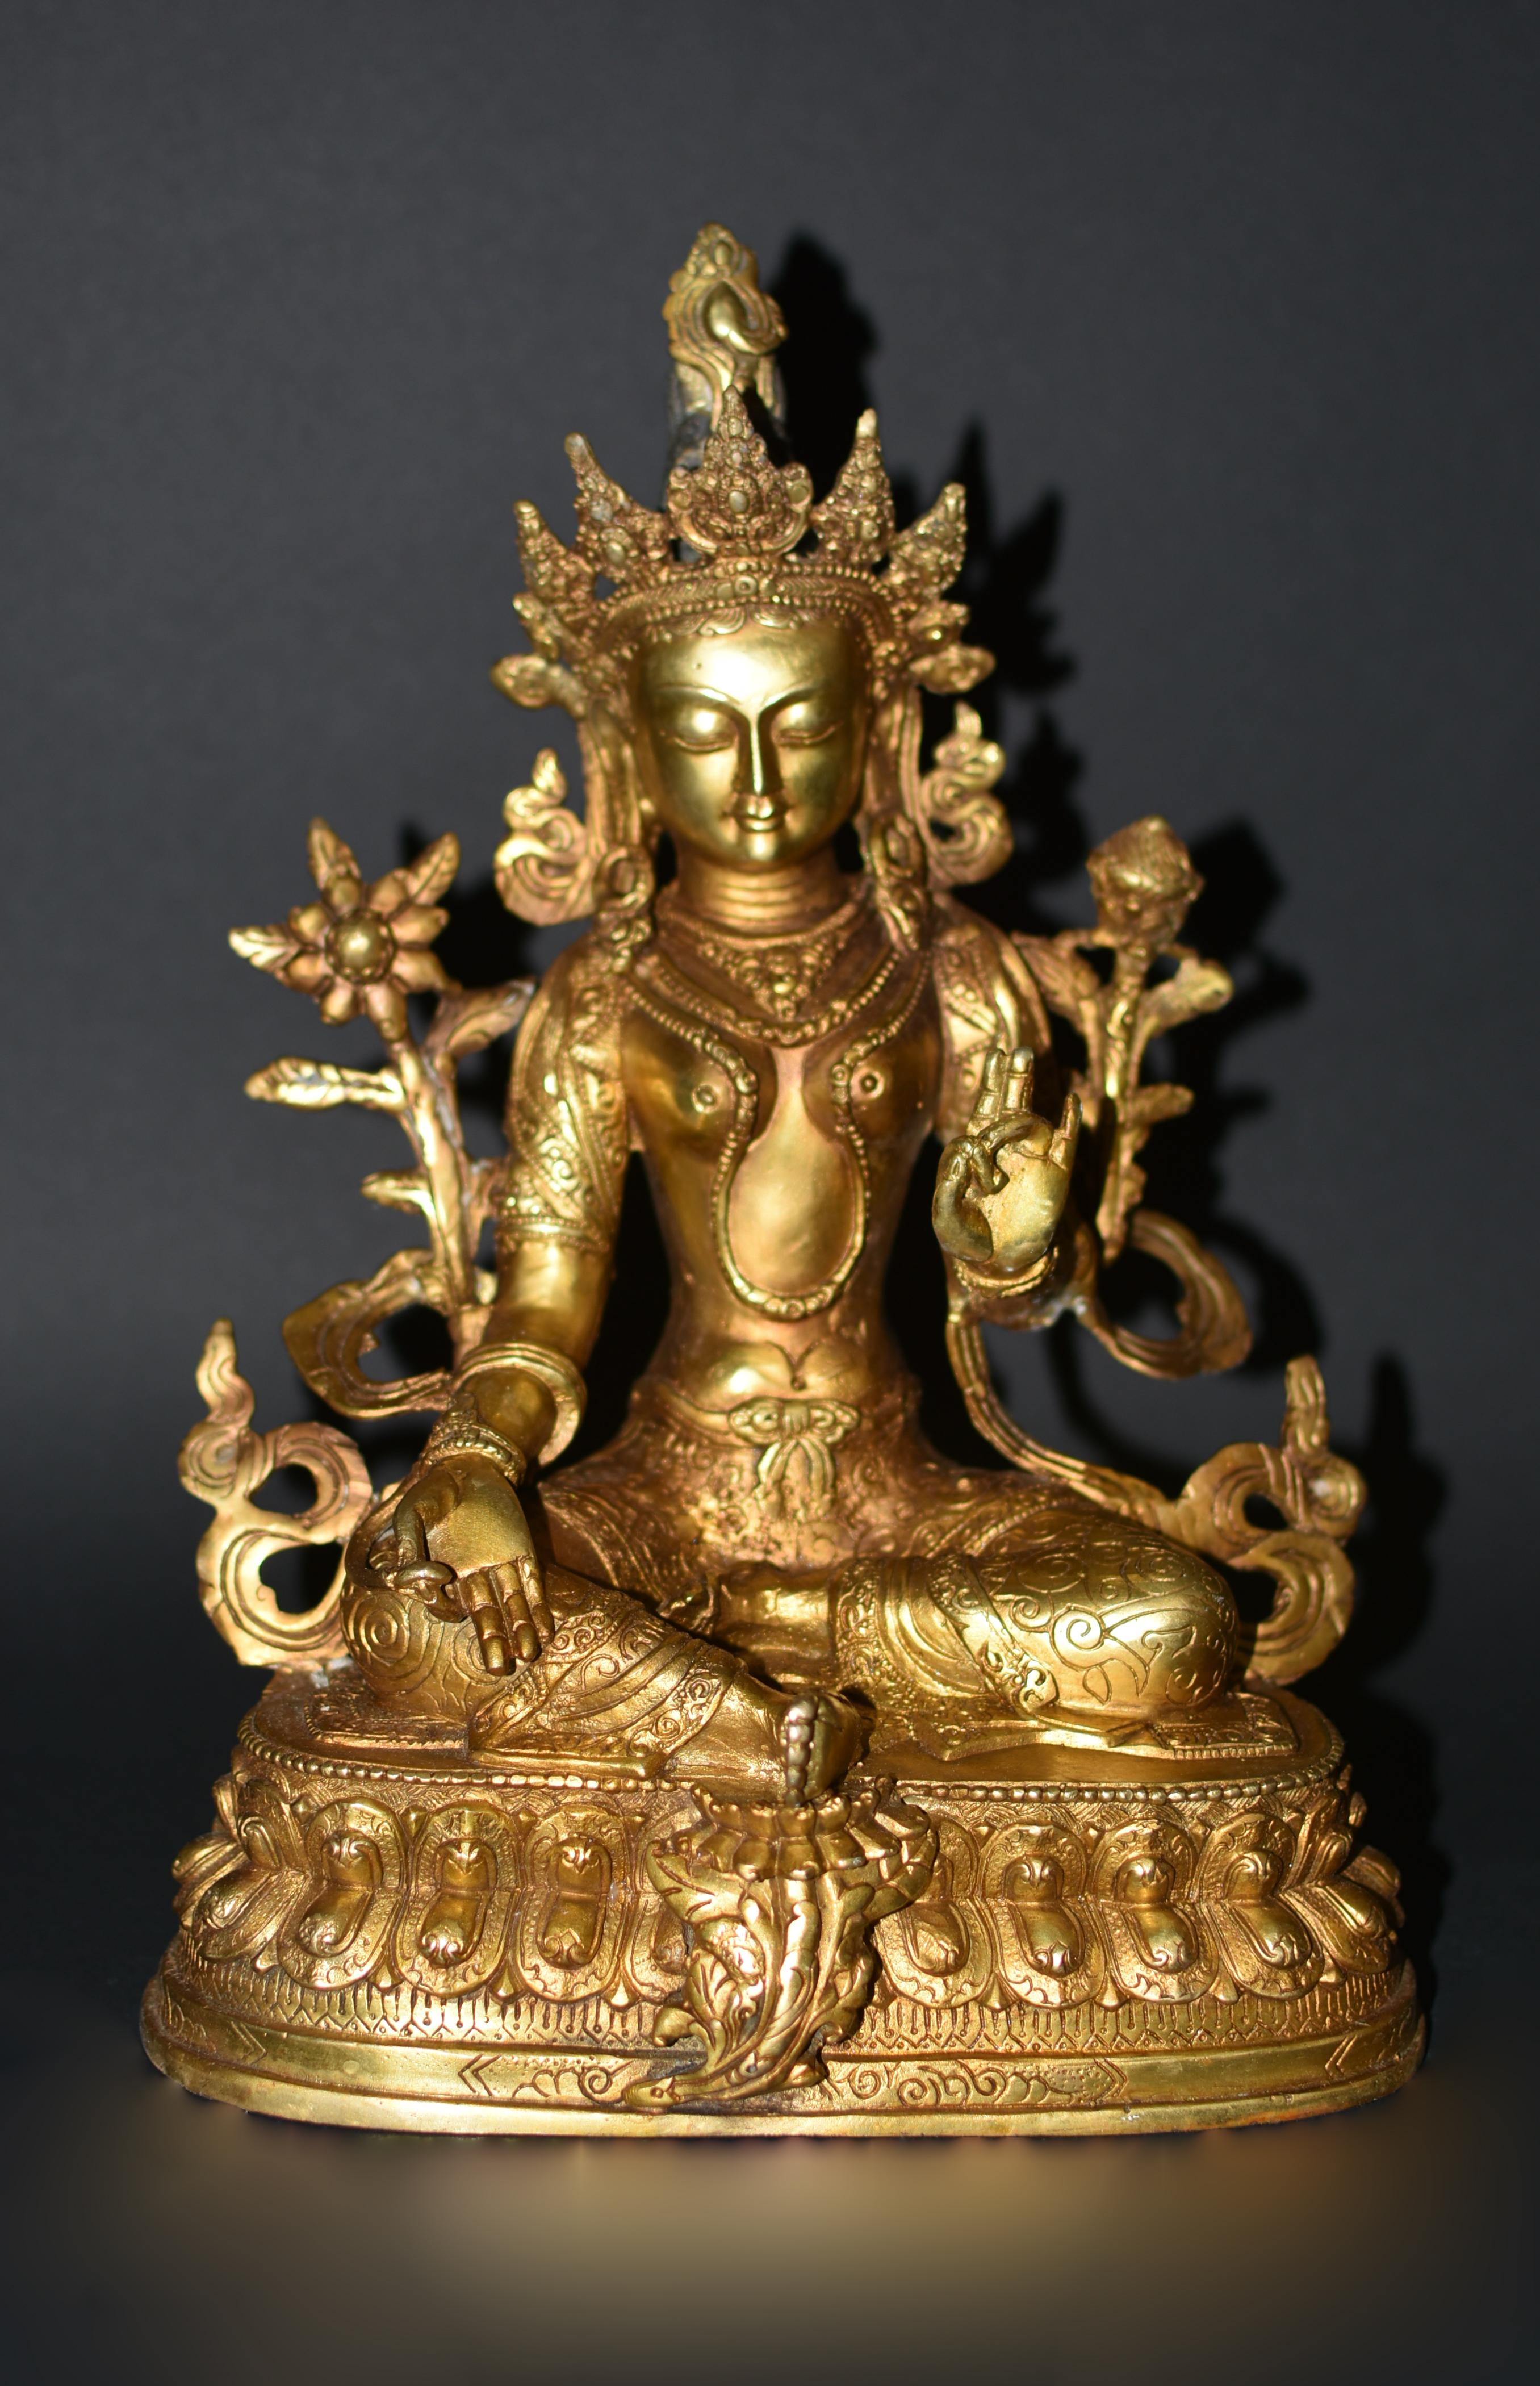 A beautiful gilt bronze statue of Tibetan Green Tara. The Goddess is seated in lalitasana on an elaborately incised double-lotus base with the pendant foot resting on a smaller lotus, the right hand extended in varadamudra and the left held in